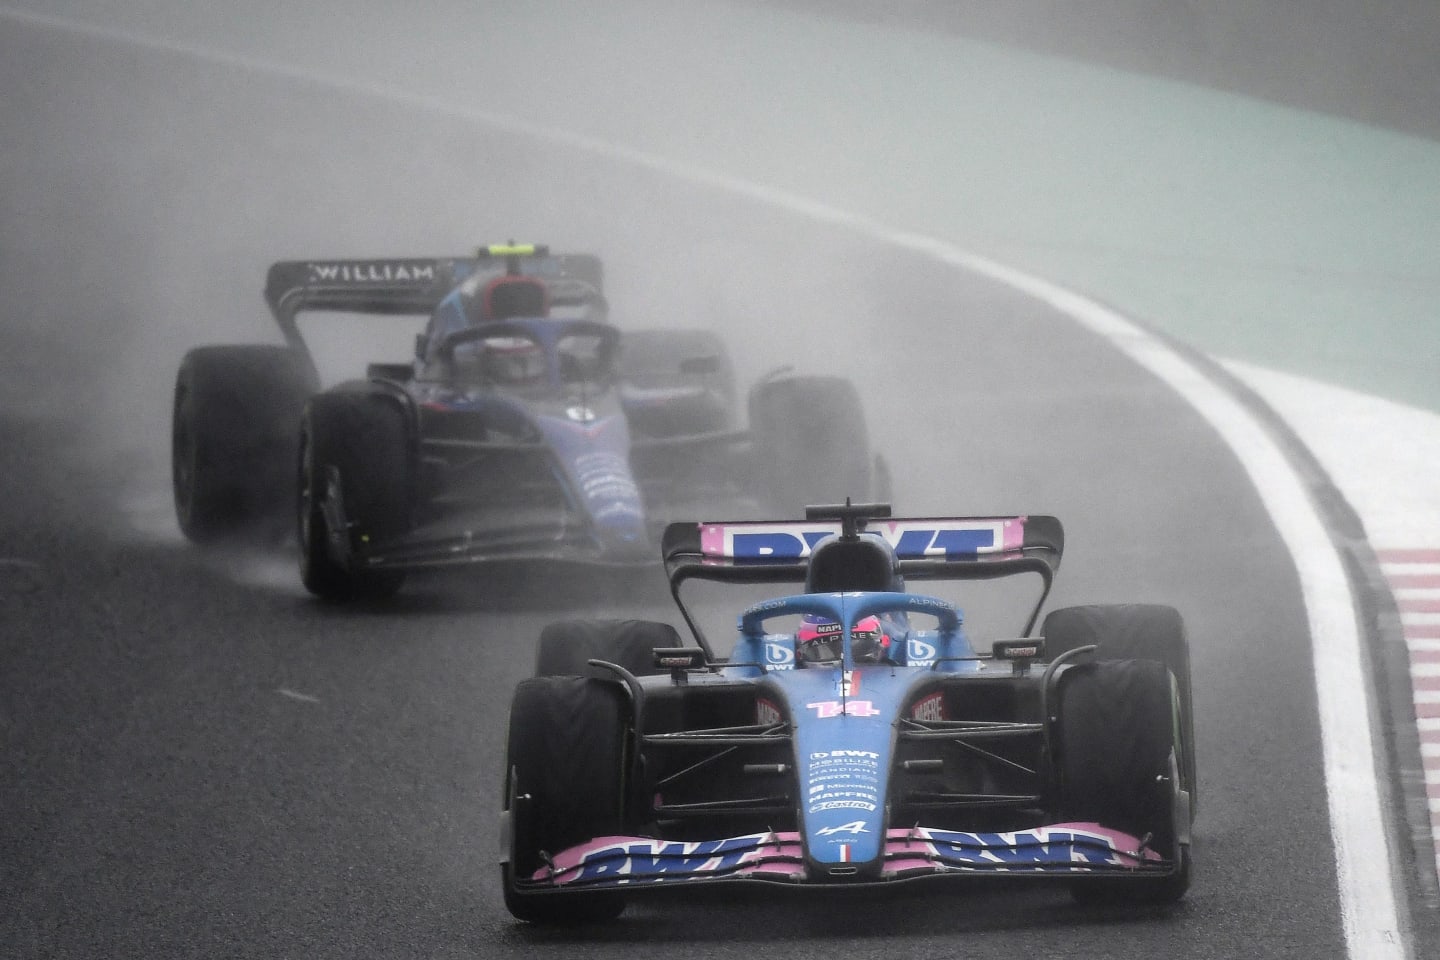 Alpine's Spanish driver Fernando Alonso (C) drives in front of Williams' Canadian driver Nicholas Latifi during the Formula One Japanese Grand Prix at Suzuka, Mie prefecture on October 9, 2022. (Photo by Toshifumi KITAMURA / AFP) (Photo by TOSHIFUMI KITAMURA/AFP via Getty Images)